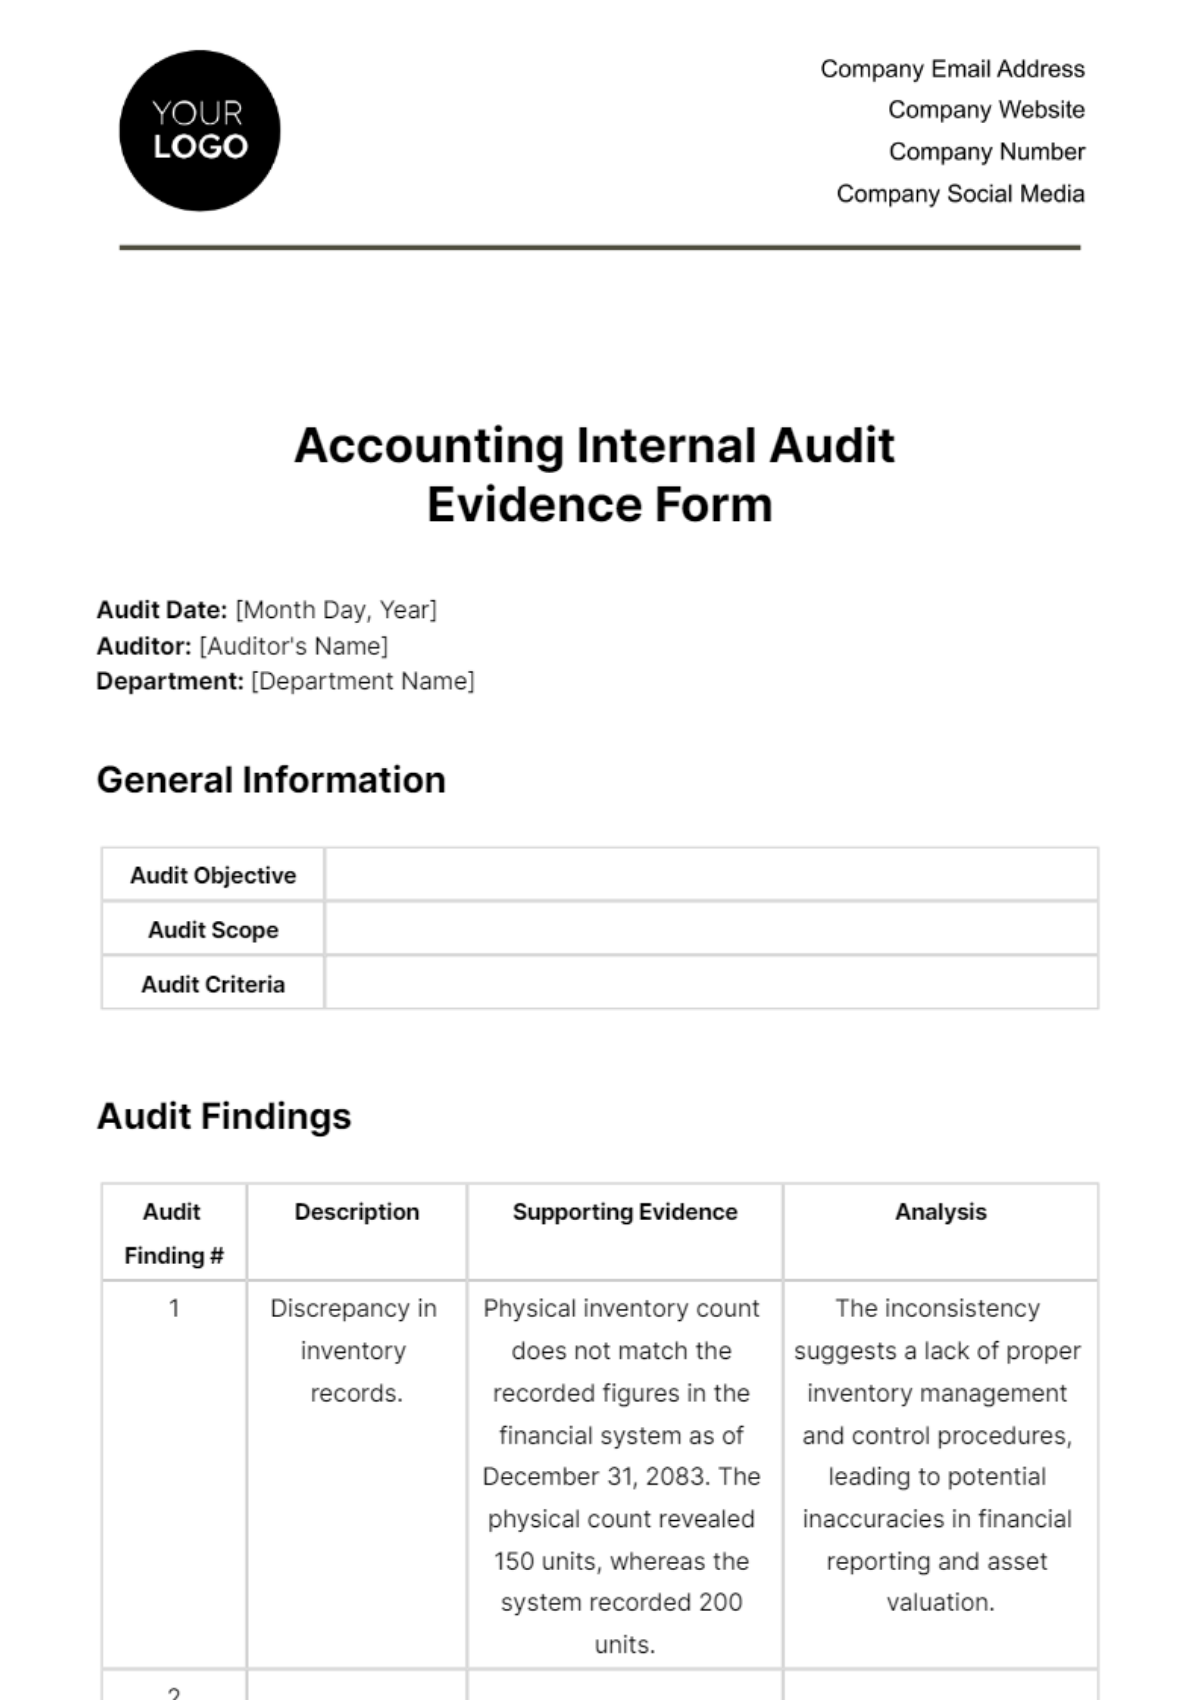 Free Accounting Internal Audit Evidence Form Template